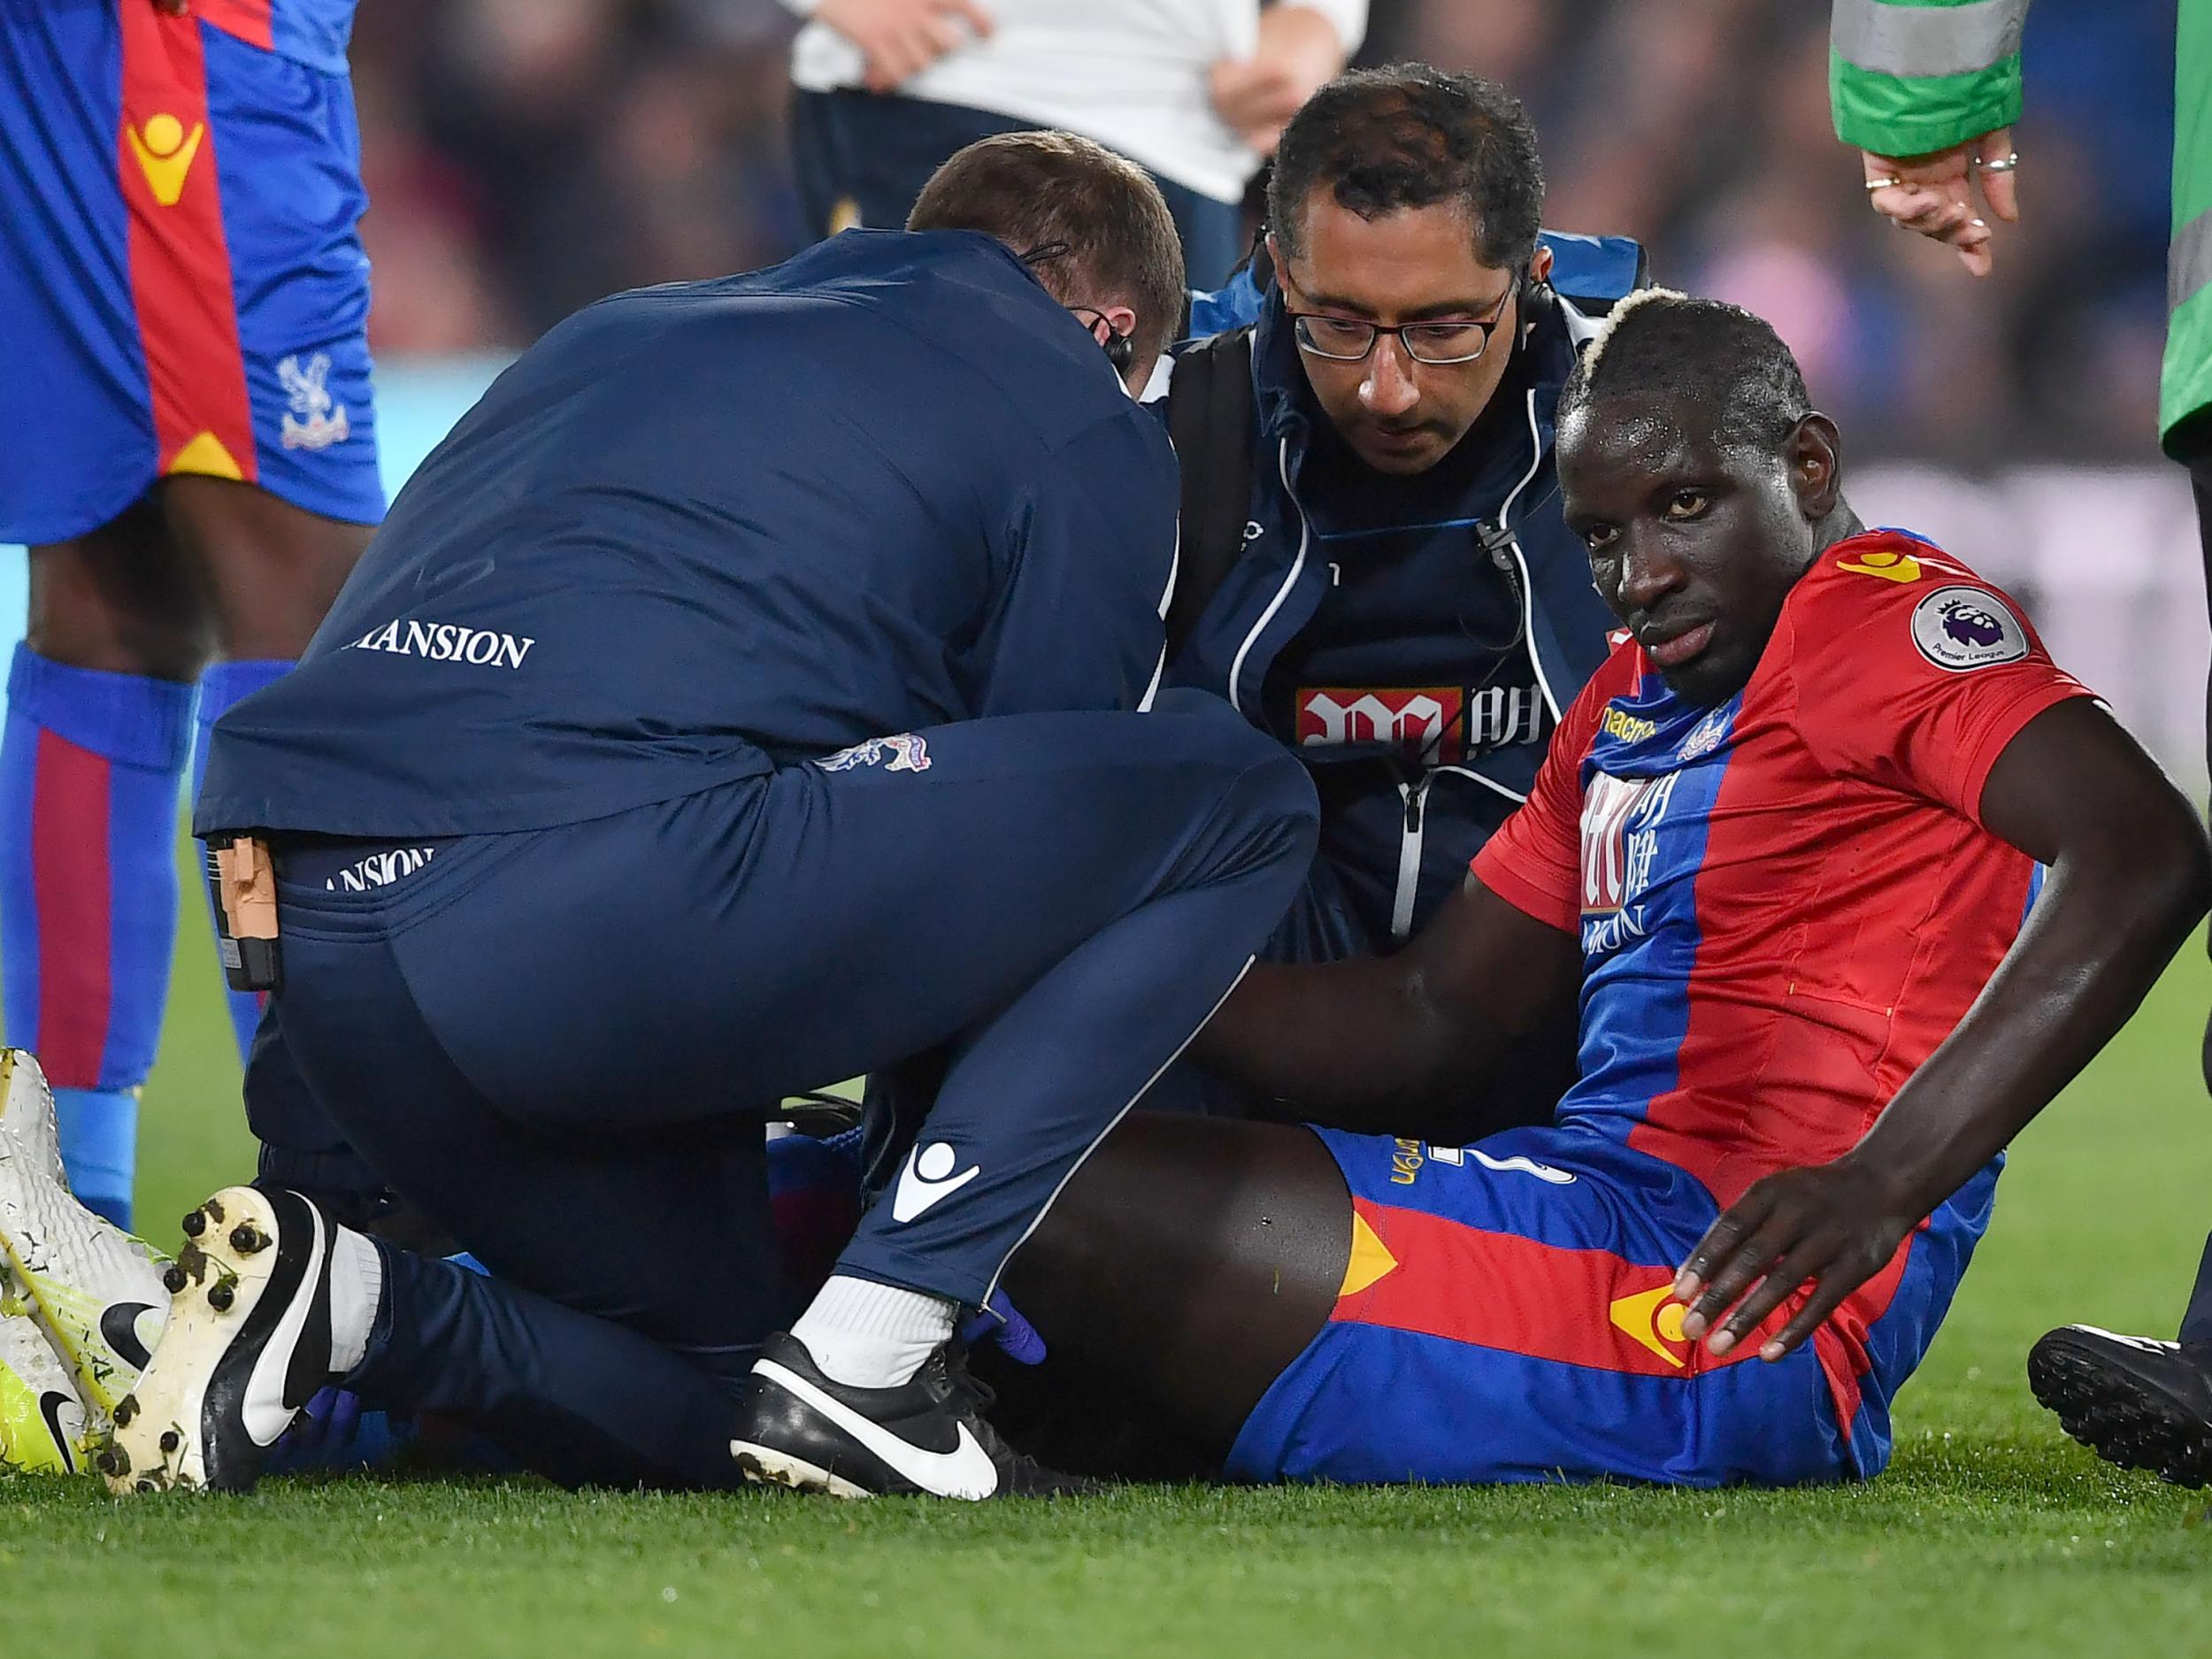 Mamadou Sakho will not play again this season